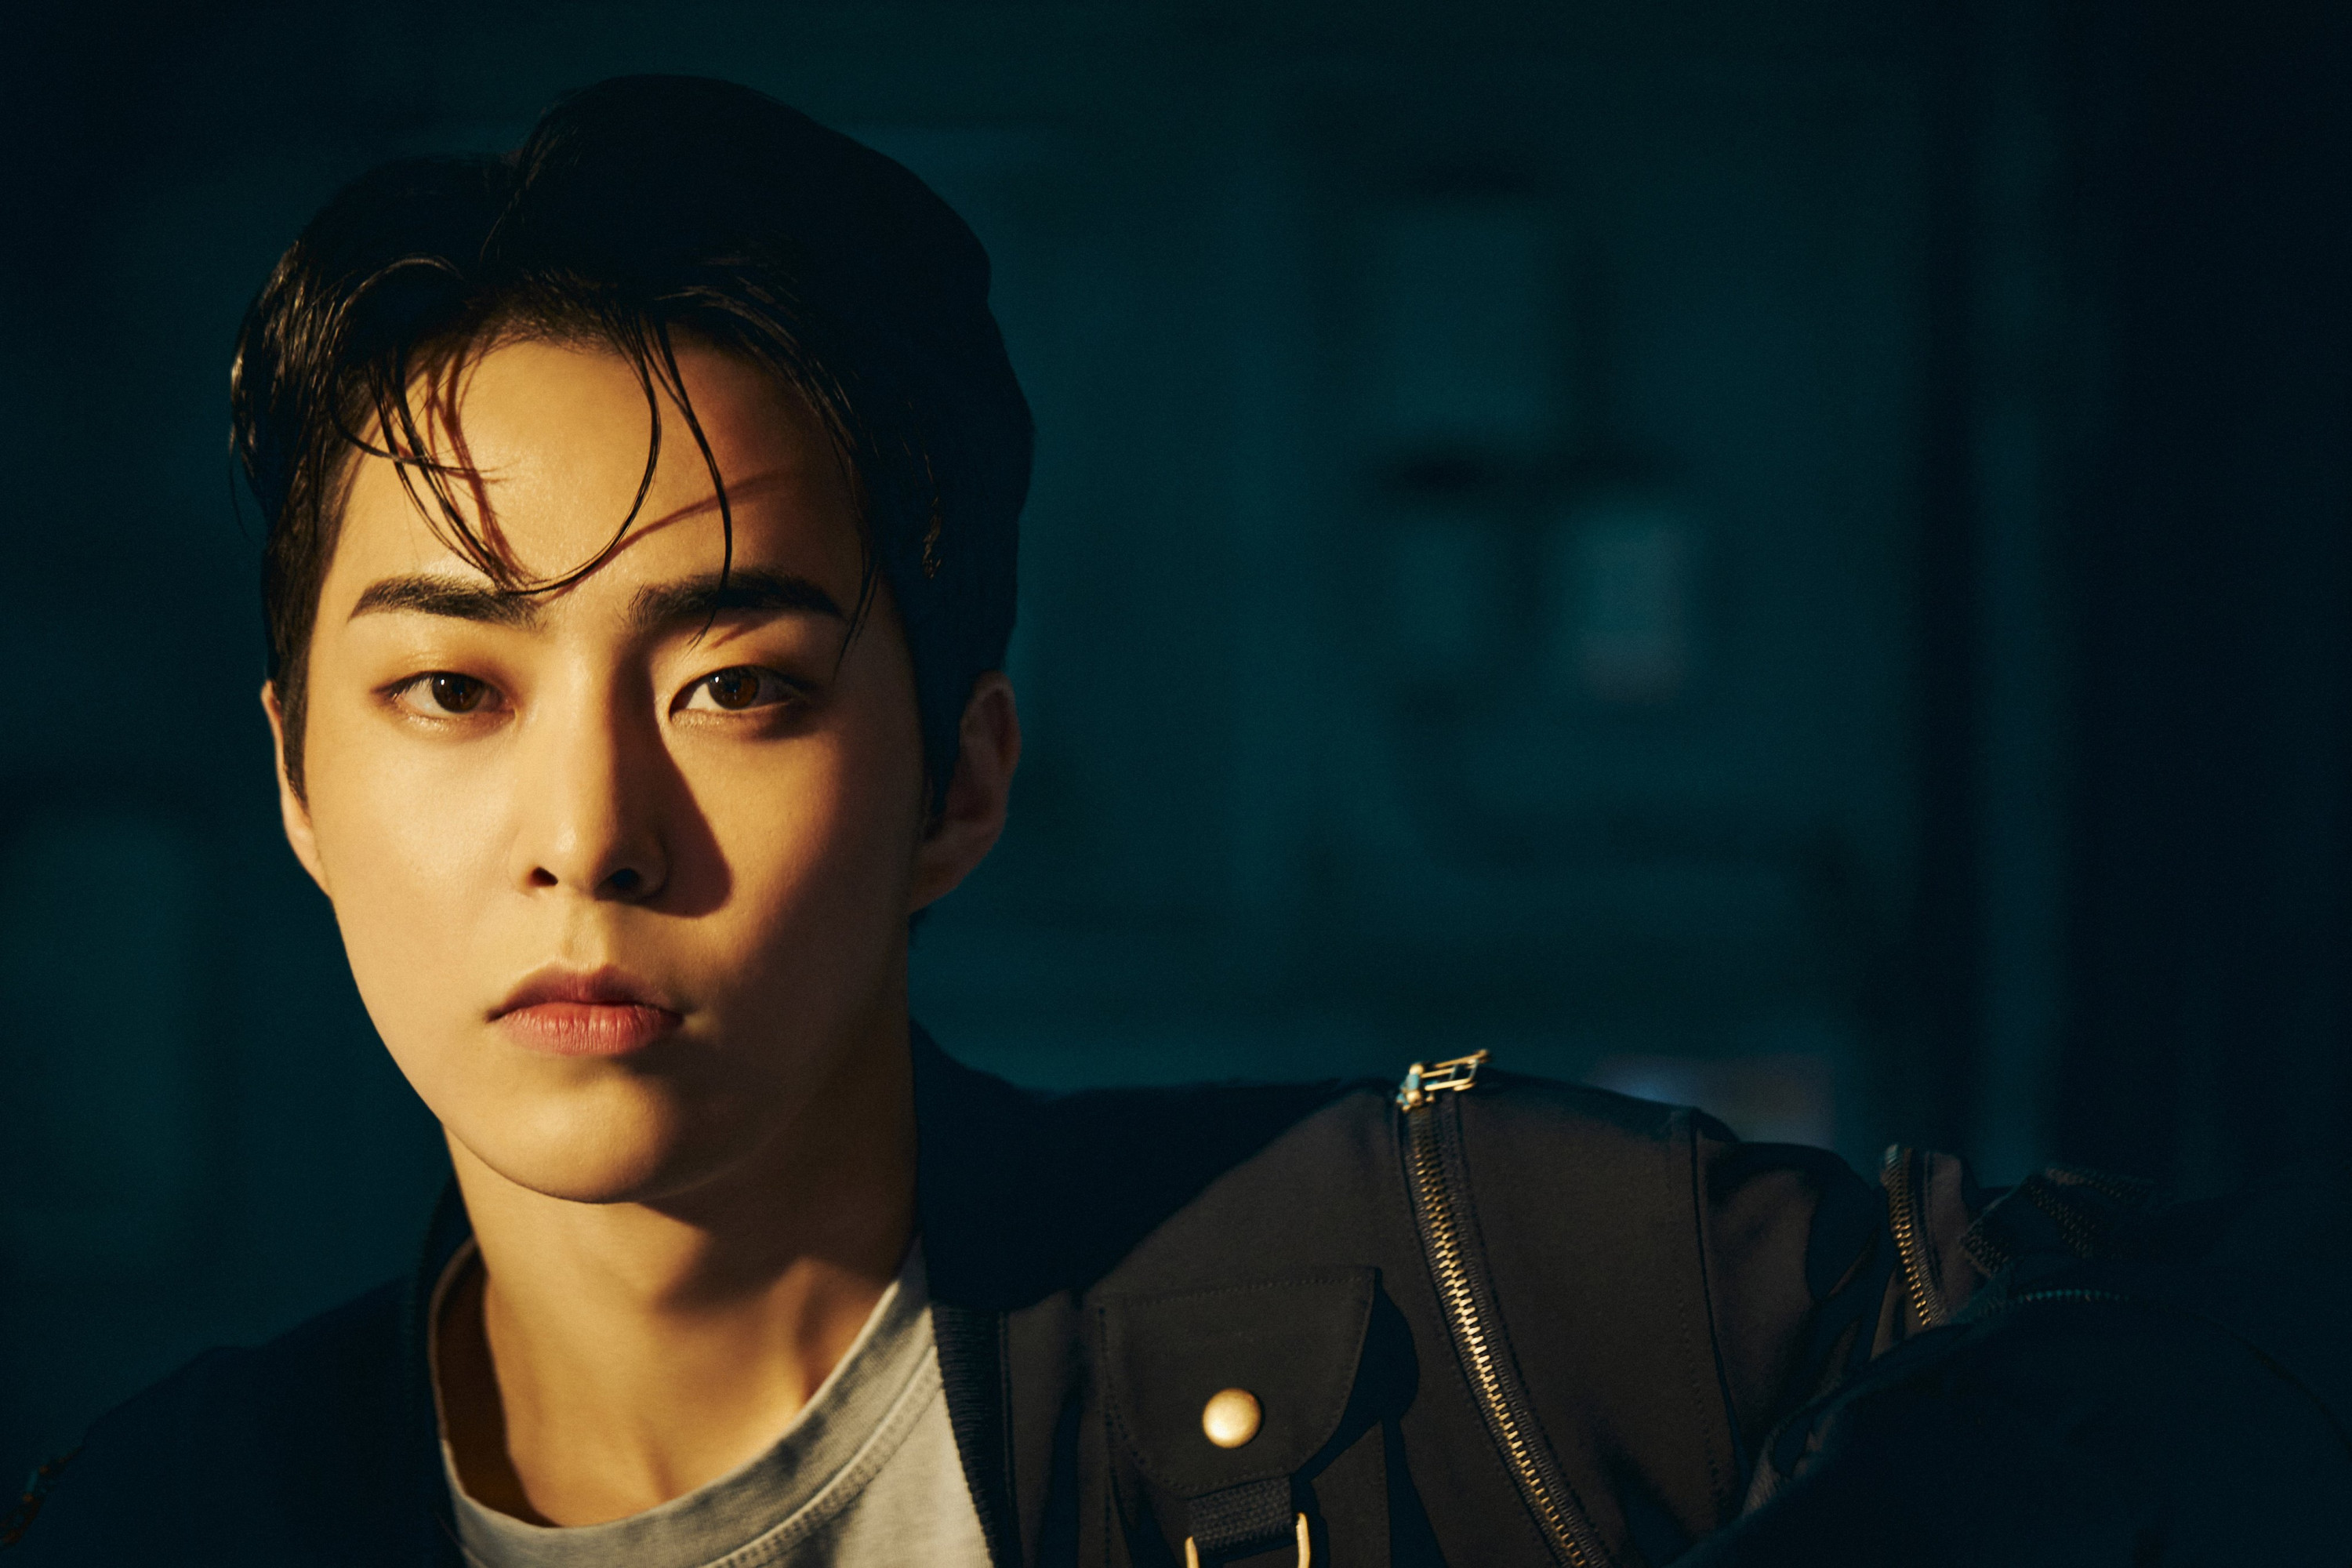 EXO Xiumin EP 02. ONE GIANT LEAP Teasers [Don't Fight The Feeling]